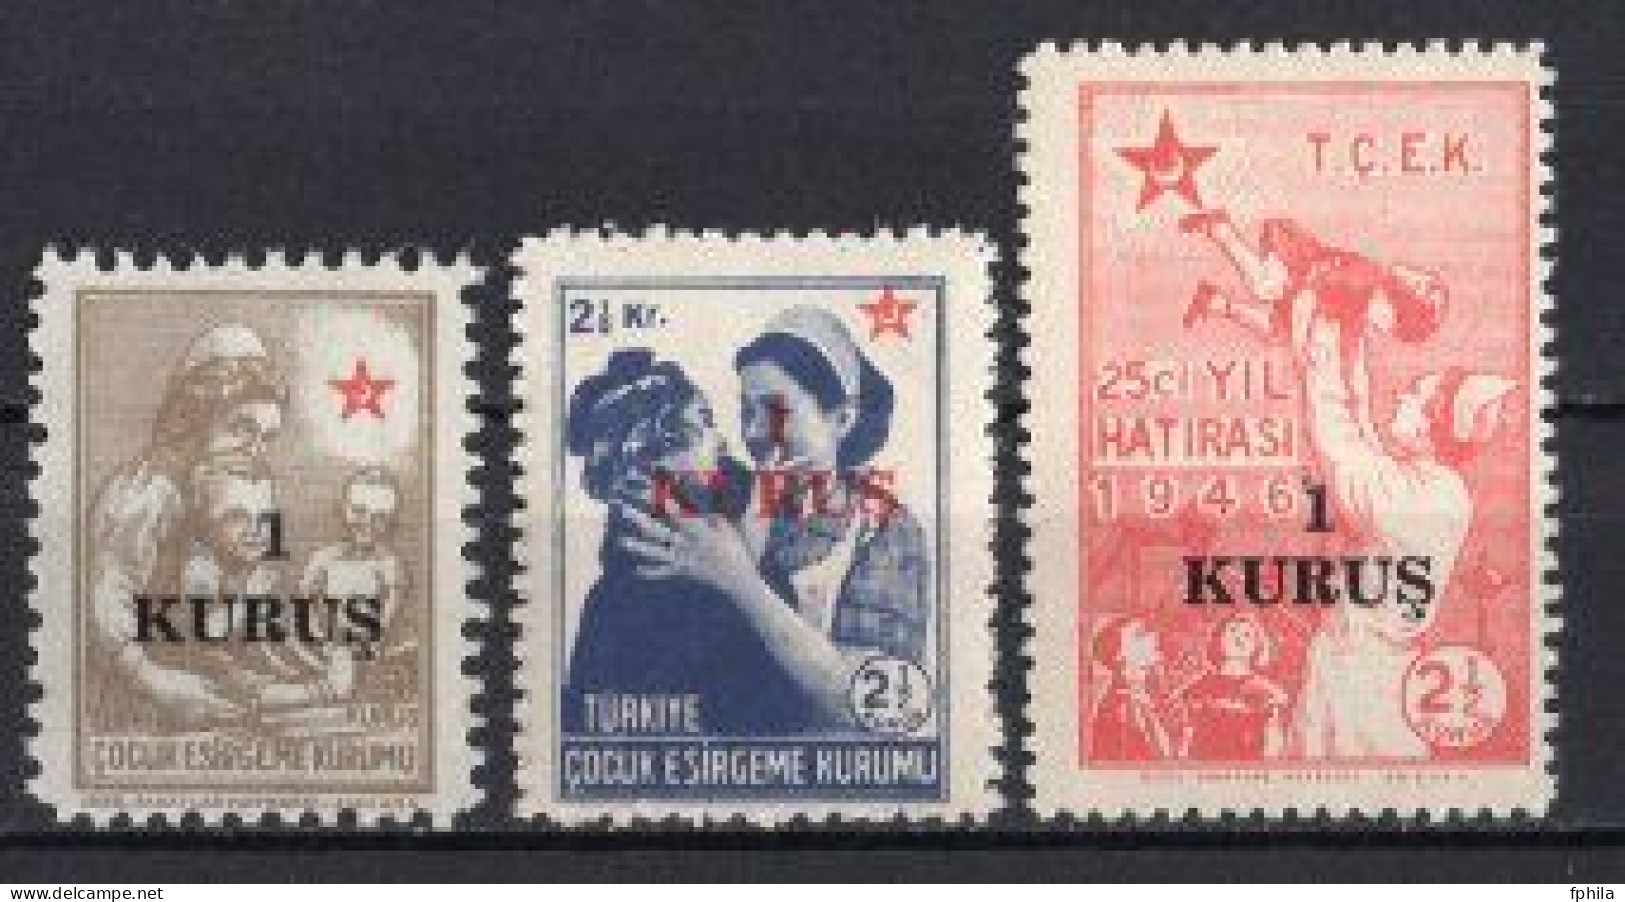 1952 TURKEY SMALL 1 KURUS SURCHARGED TURKISH SOCIETY FOR THE PROTECTION OF CHILDREN STAMPS MNH ** - Charity Stamps